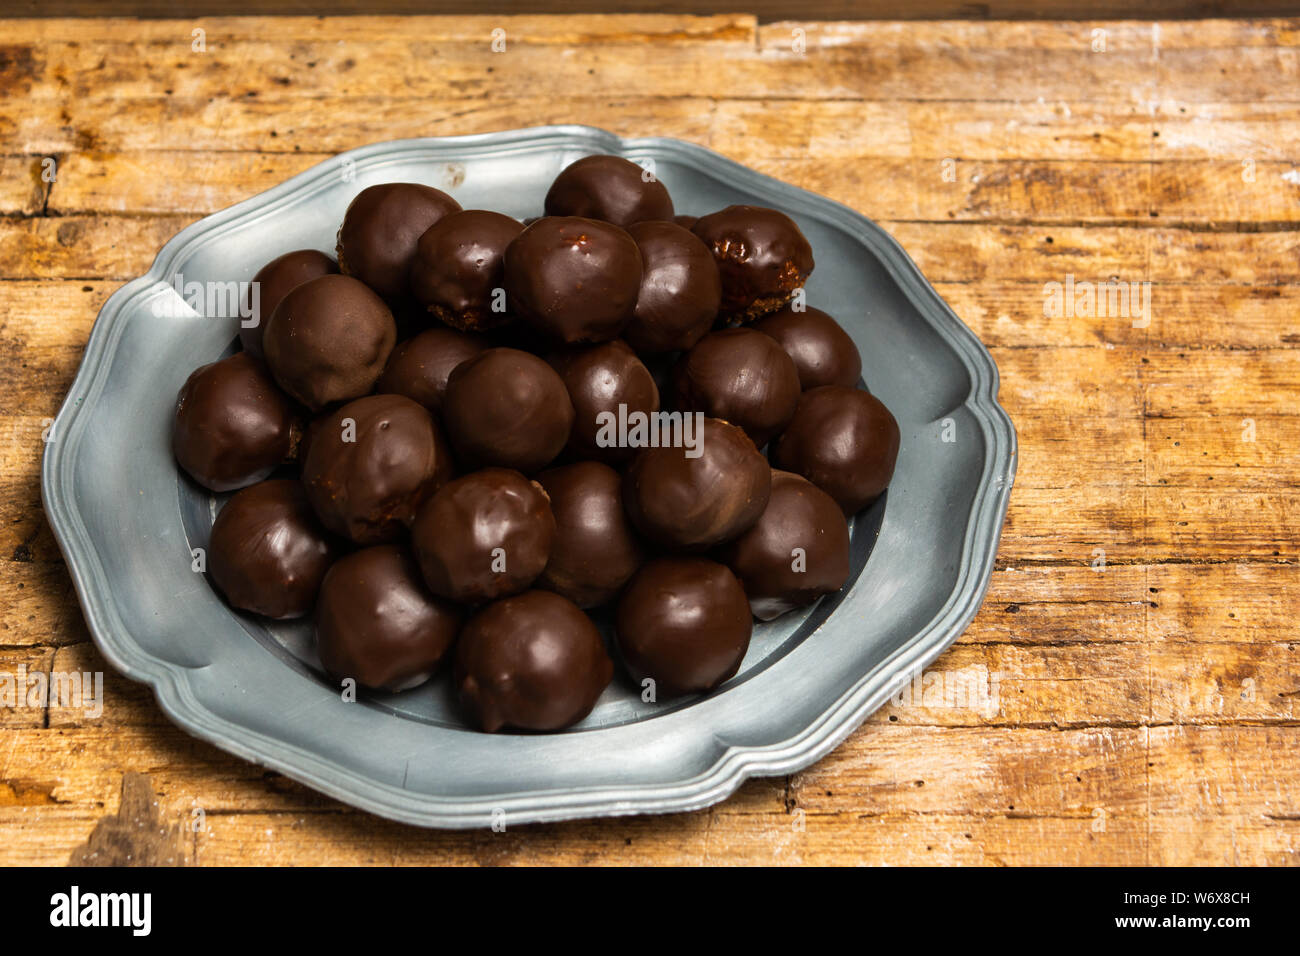 Homemade chocolate cookie balls on a plate Stock Photo